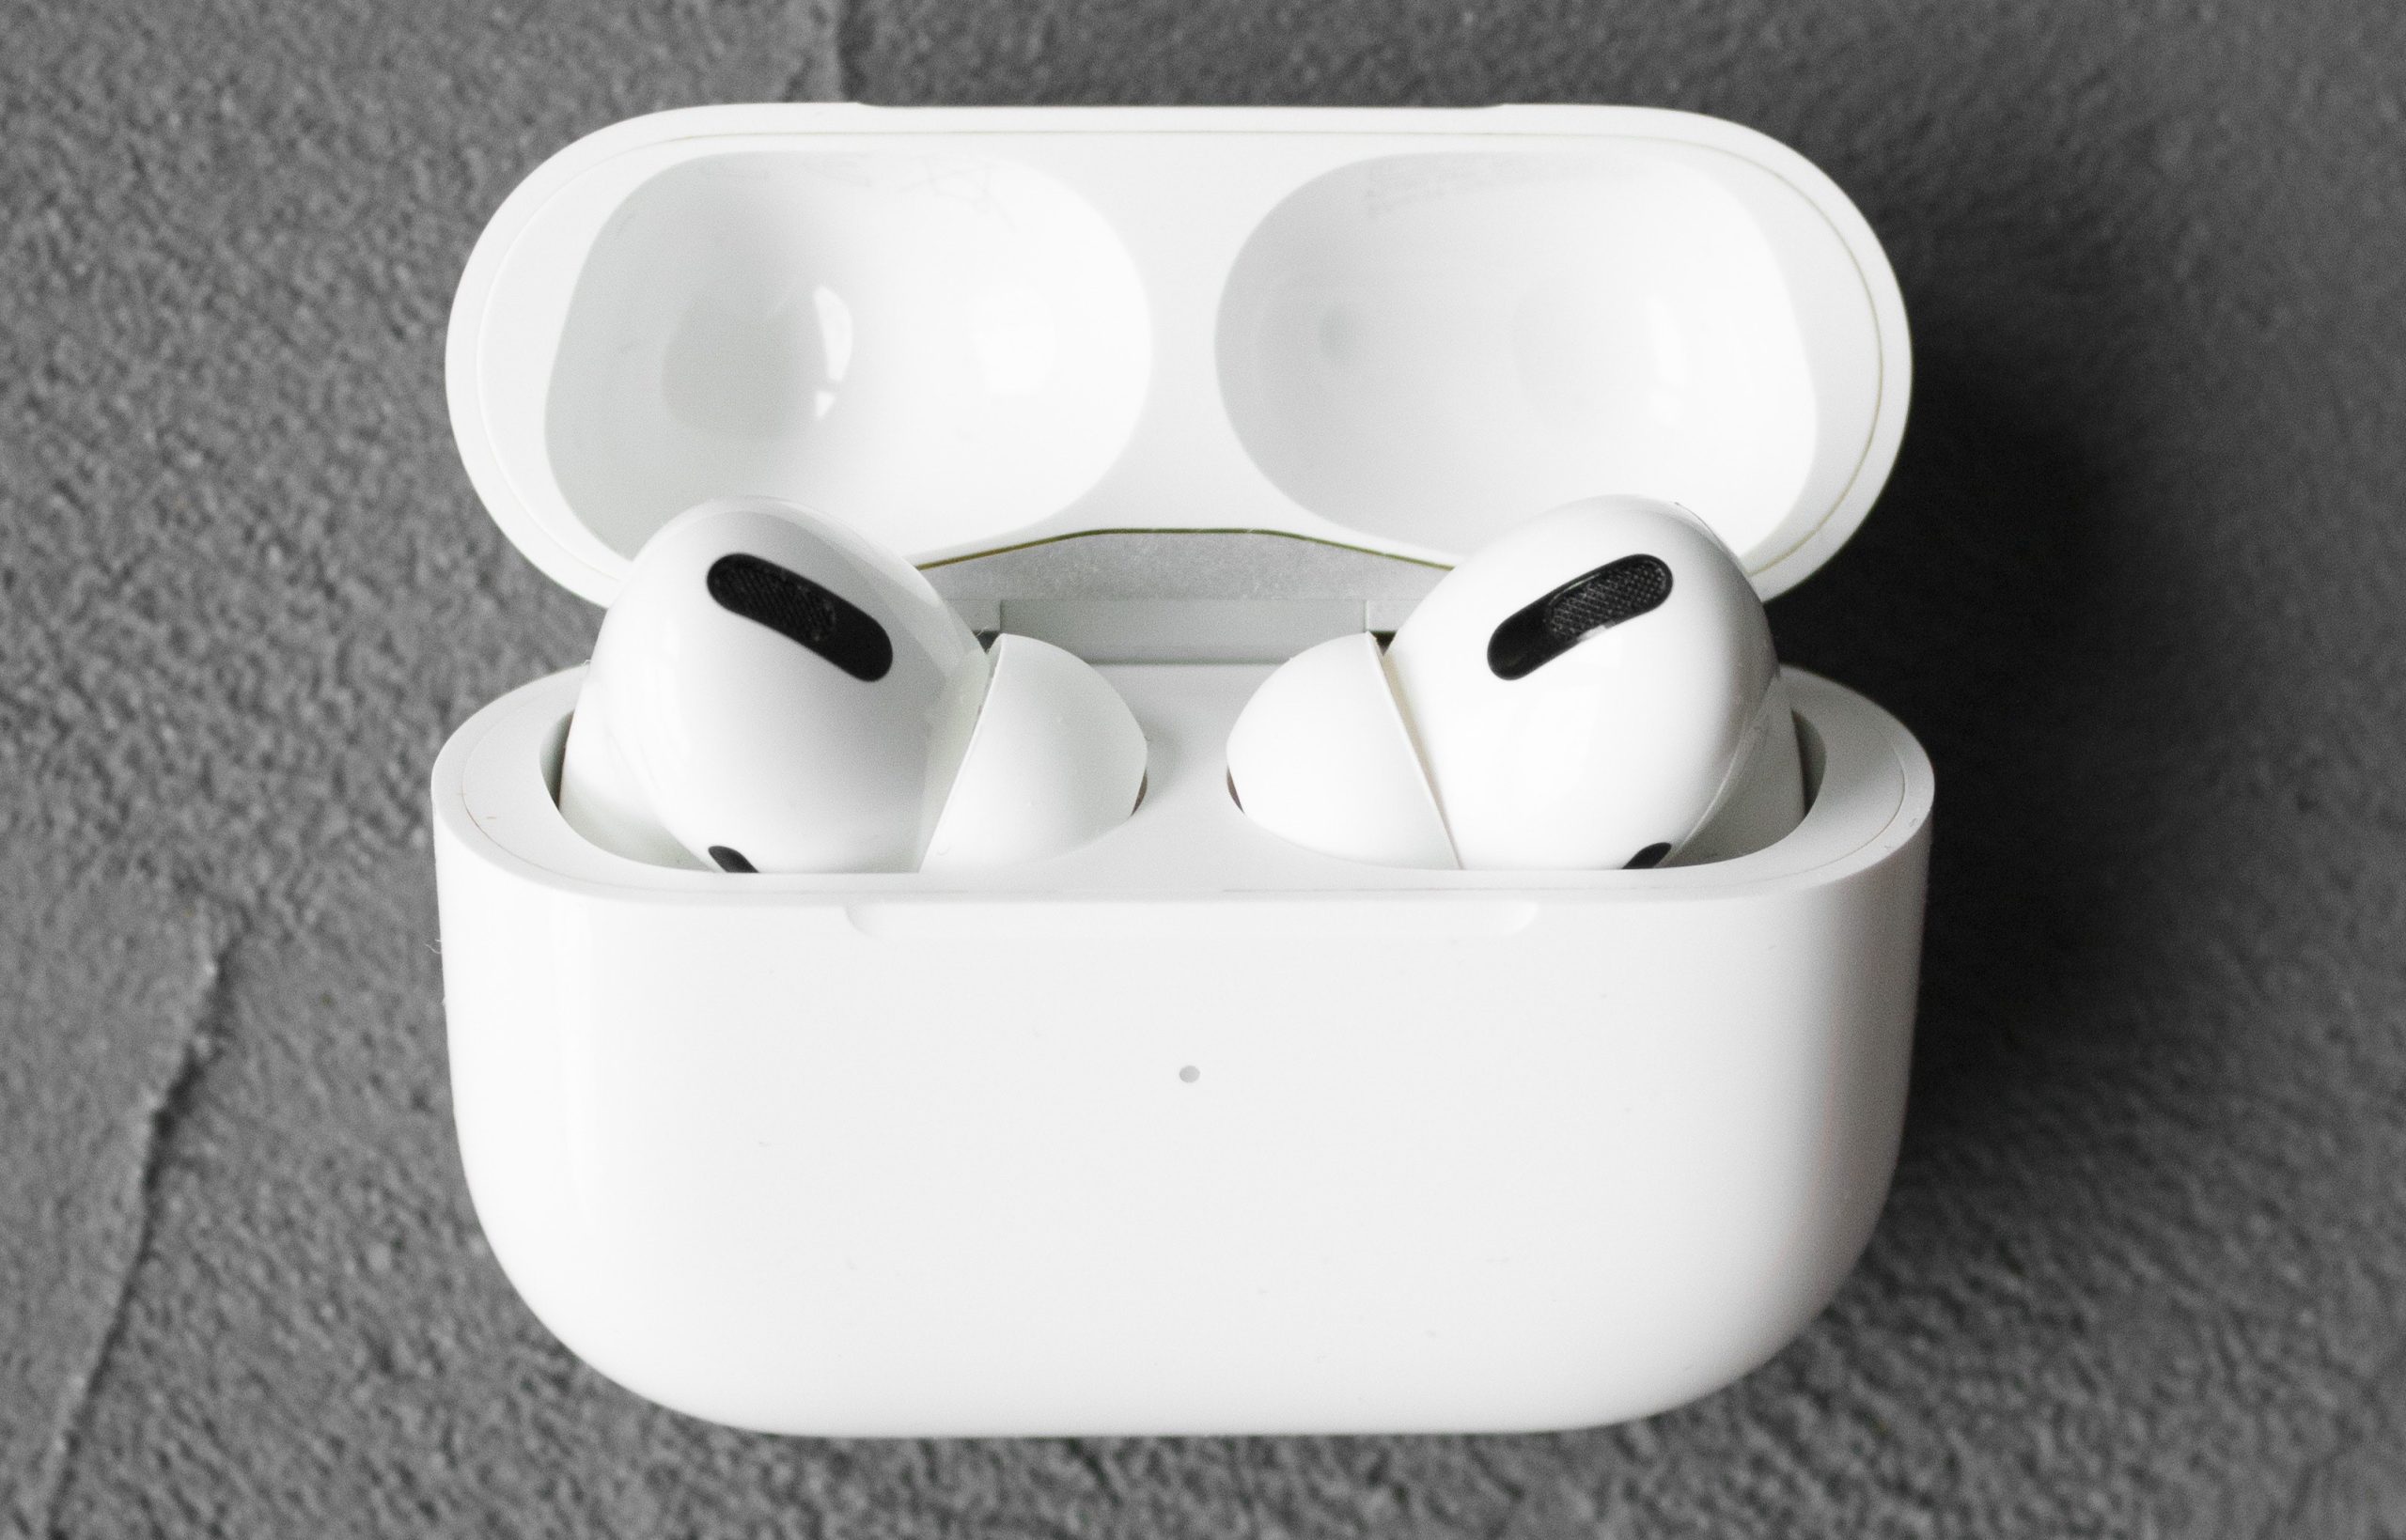 AirPods Pro Dropped in toilet